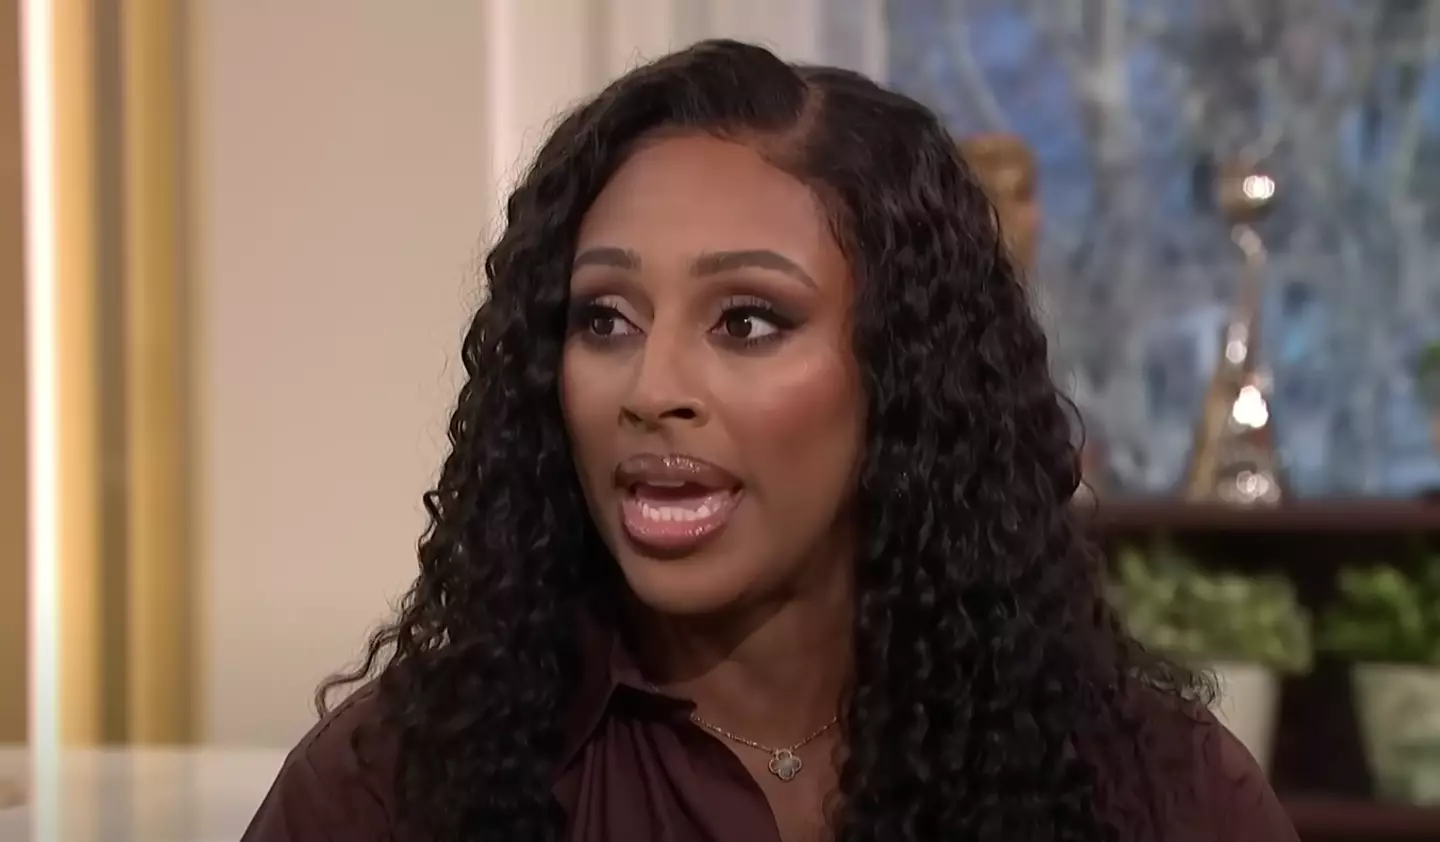 Alexandra Burke has opened up about her painful IBS symptoms.